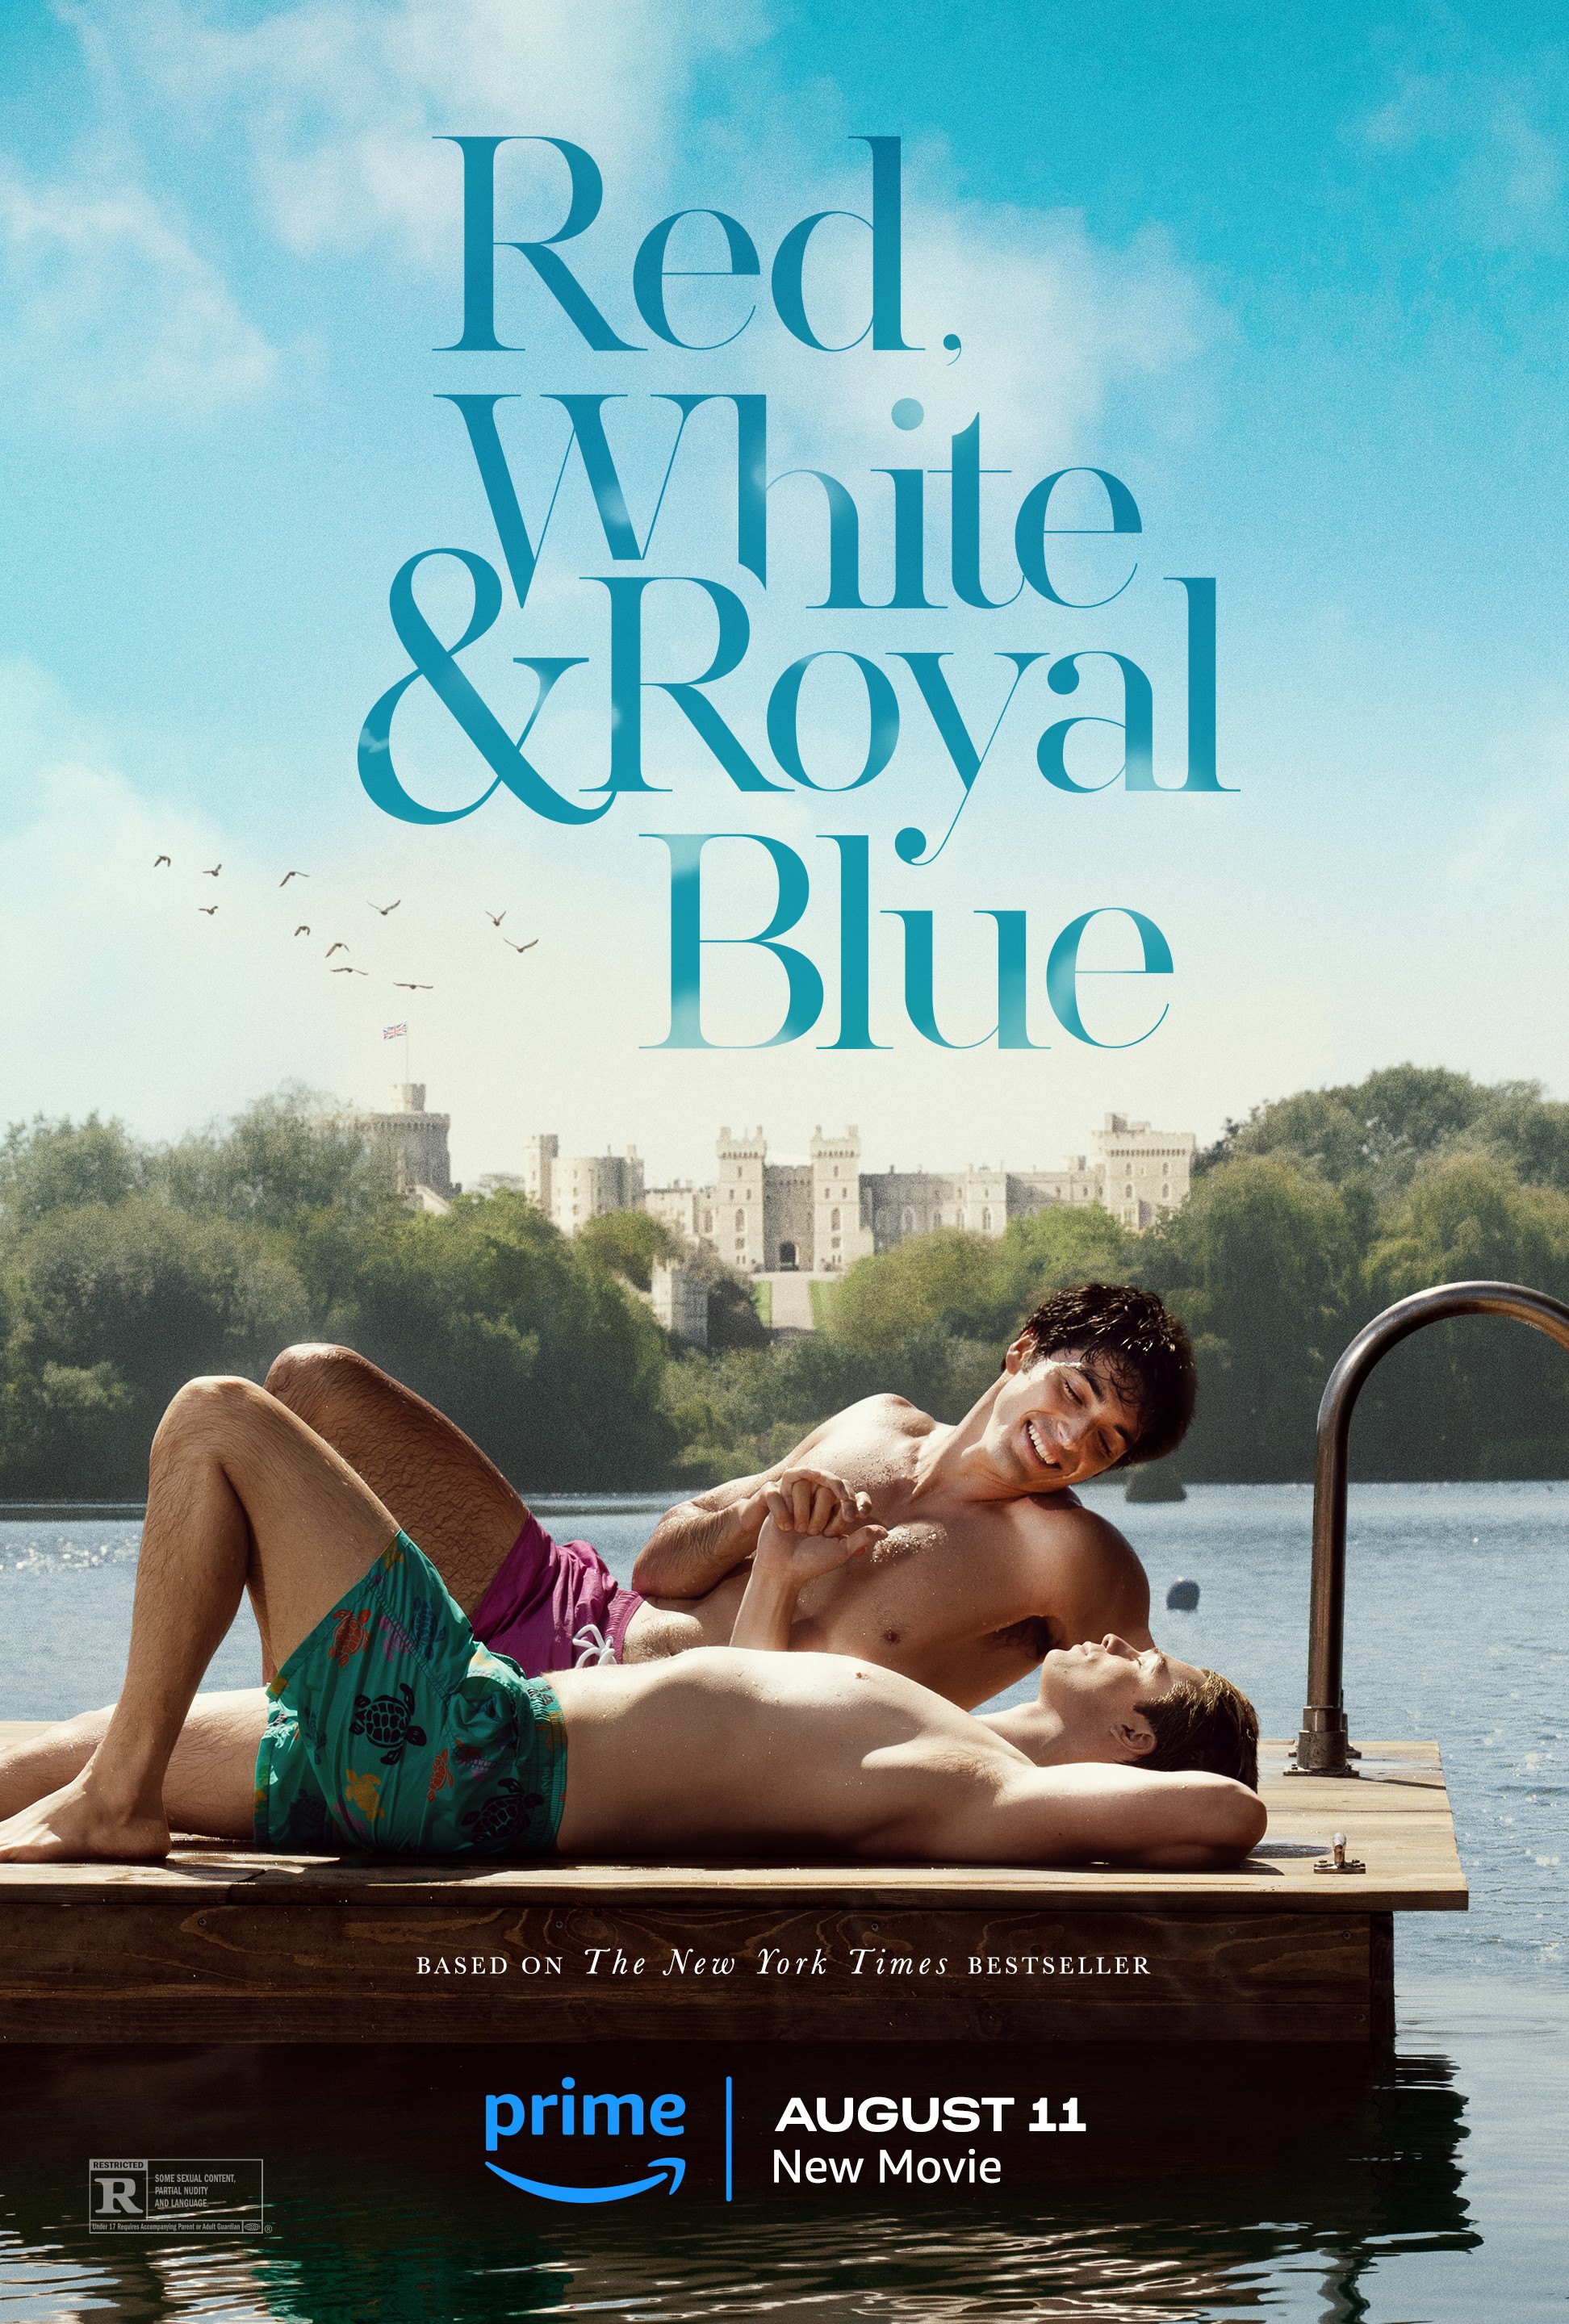 Sexy Nude Bf Film - Red, White & Royal Blue | Rotten Tomatoes